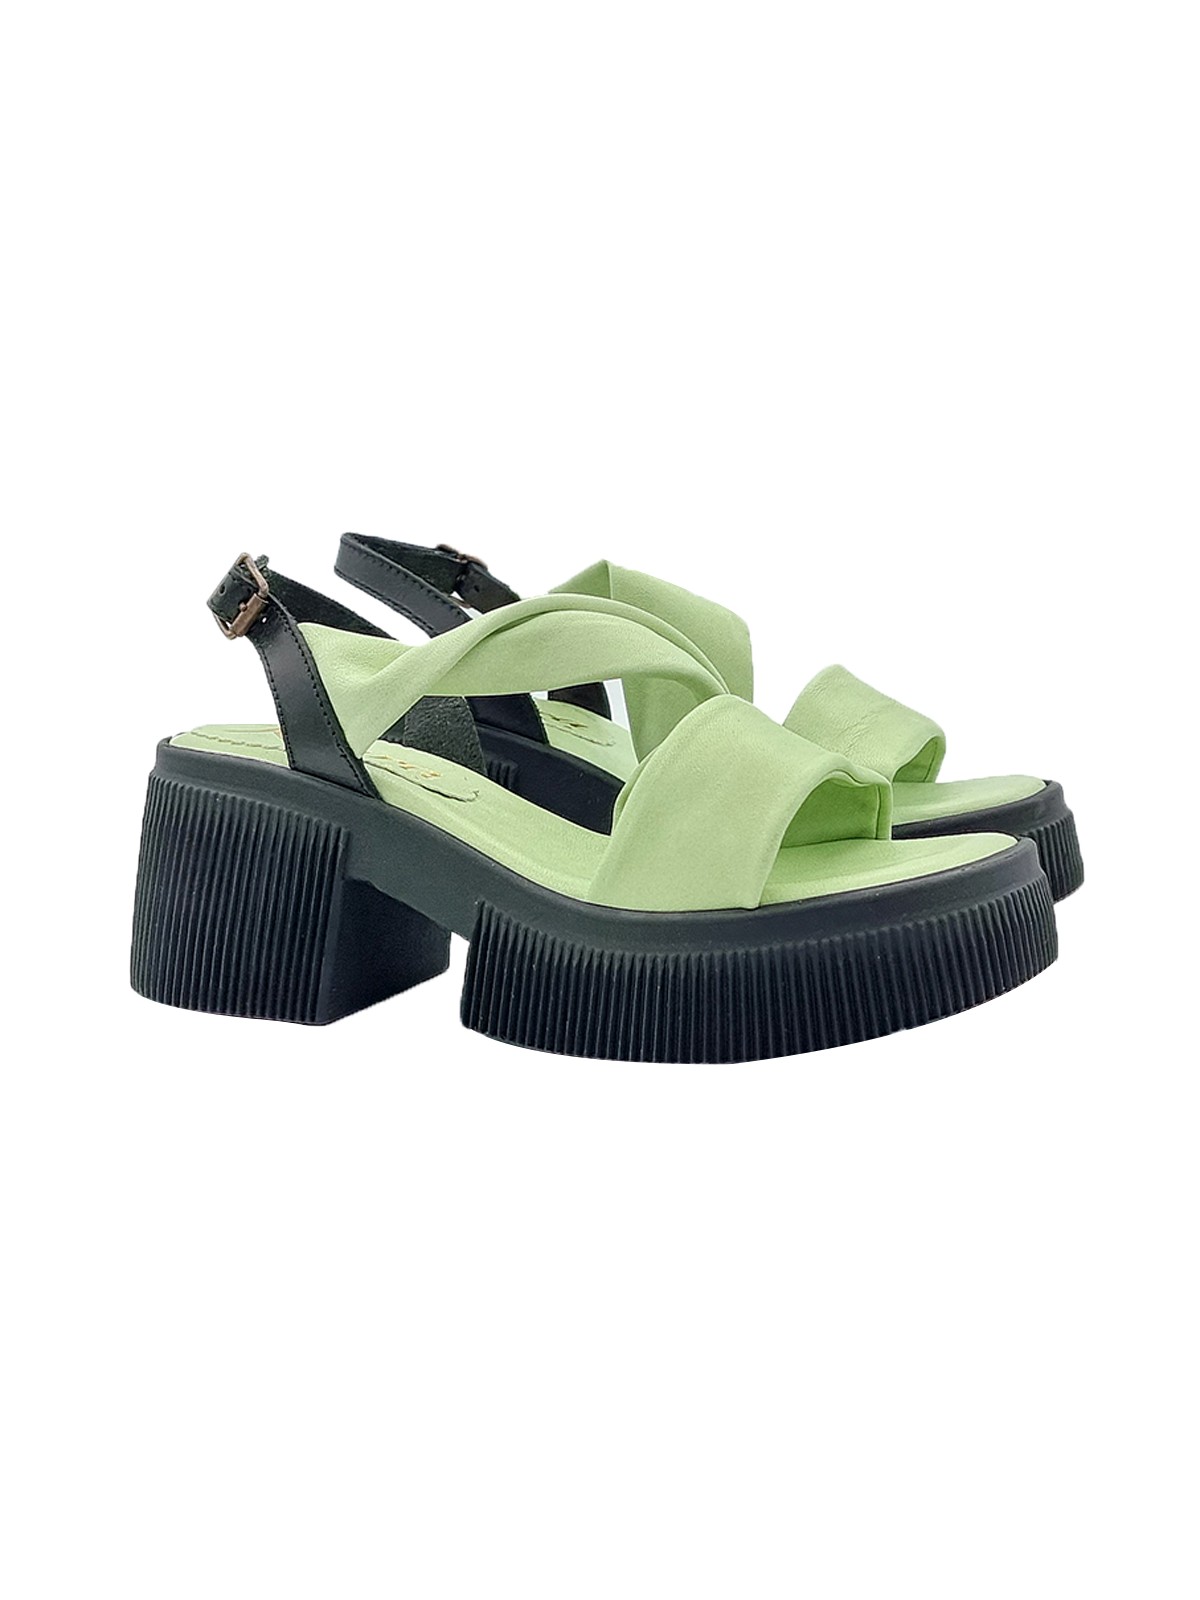 SANDALS WITH GREEN LEATHER BAND AND 7 CM HEEL